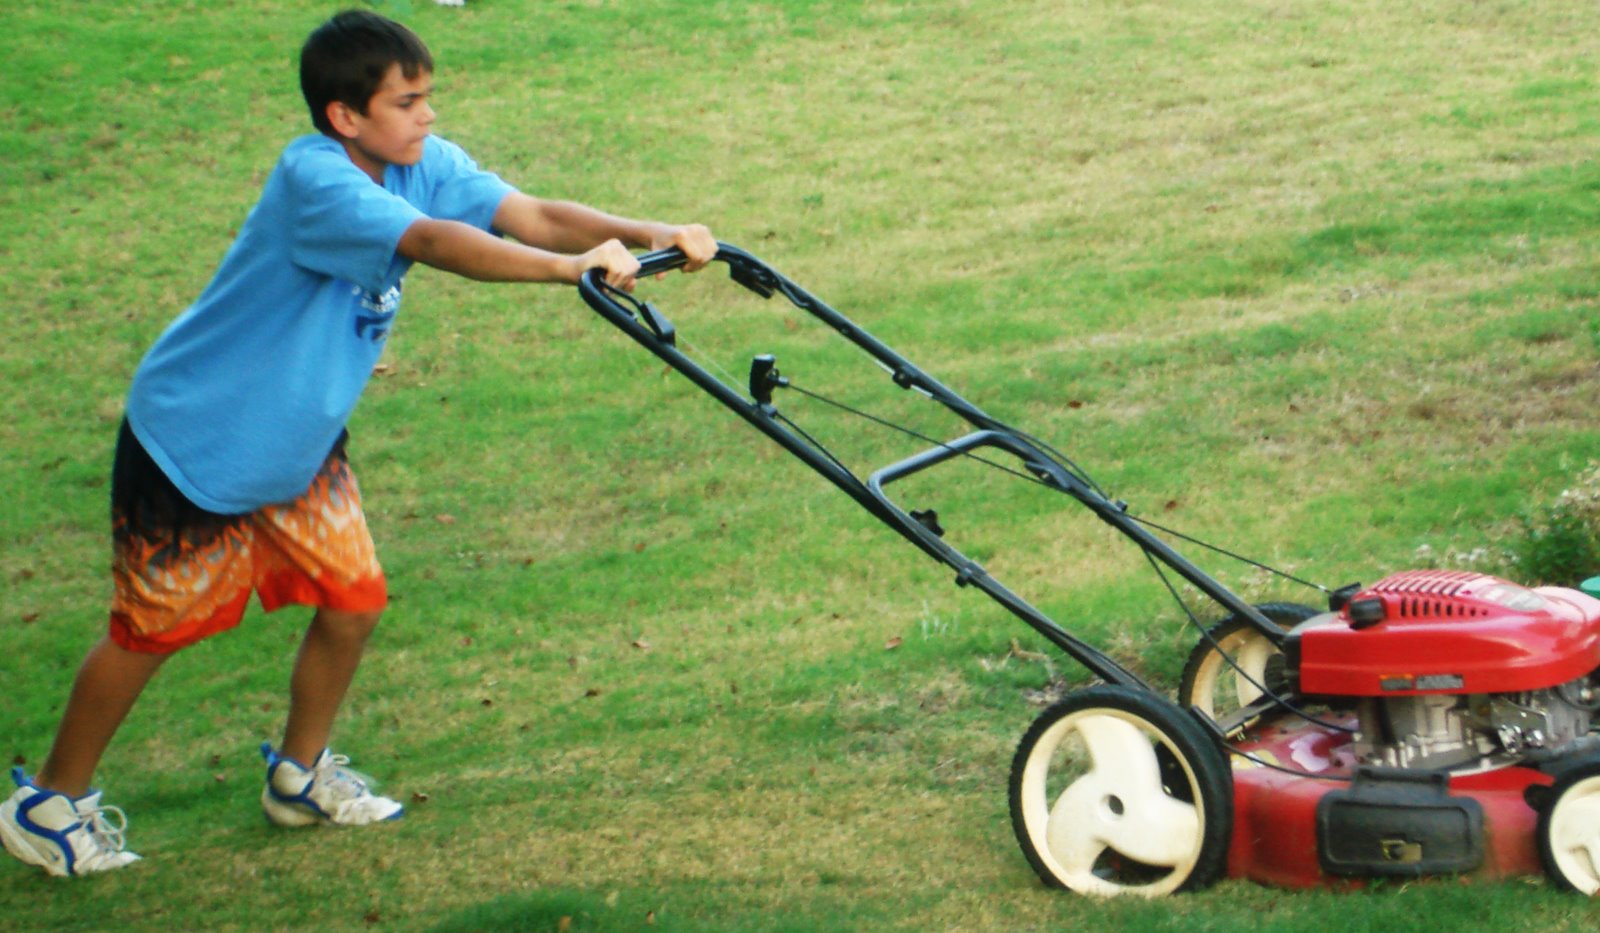 [Austin+Lawn+Mower+croped+and+overlay.jpg]